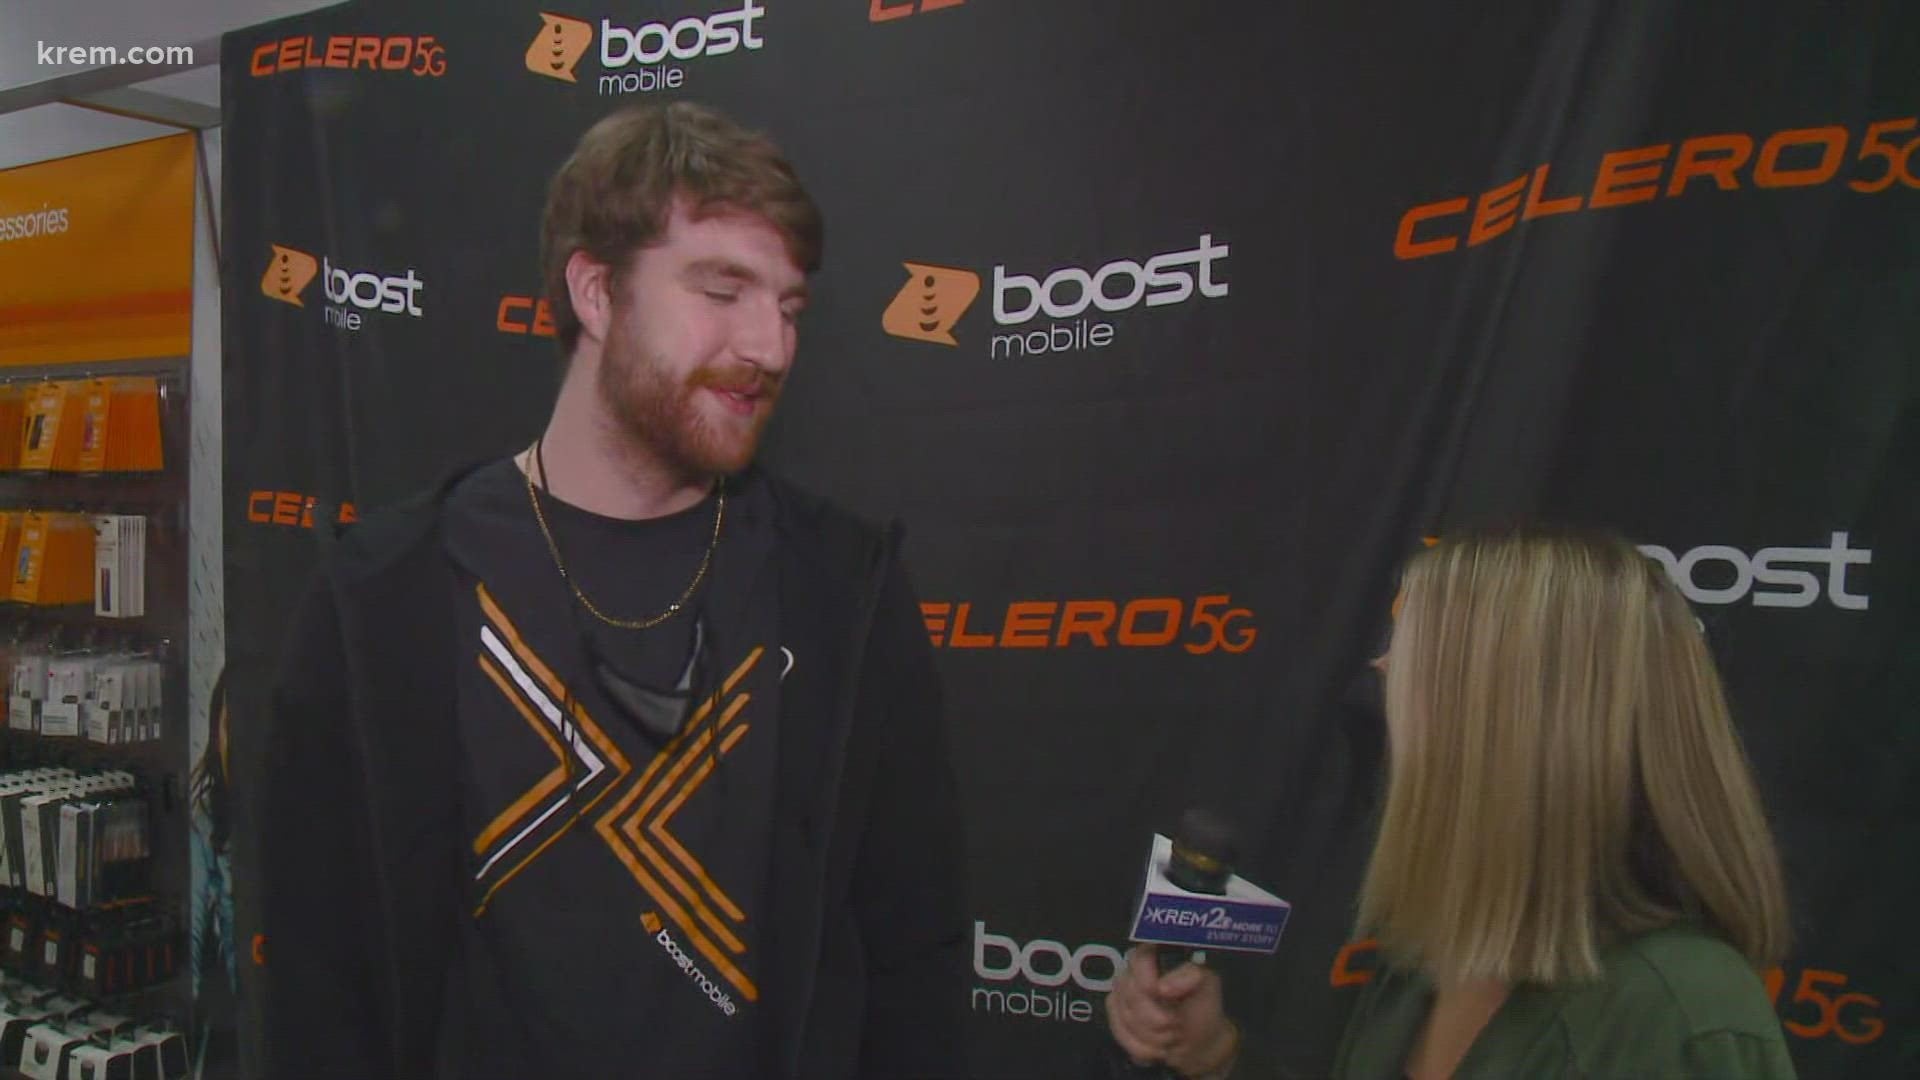 KREM 2 Sports Director Brenna Greene interviewed Drew Timme at his meet and greet event at Boost Mobile in Spokane.